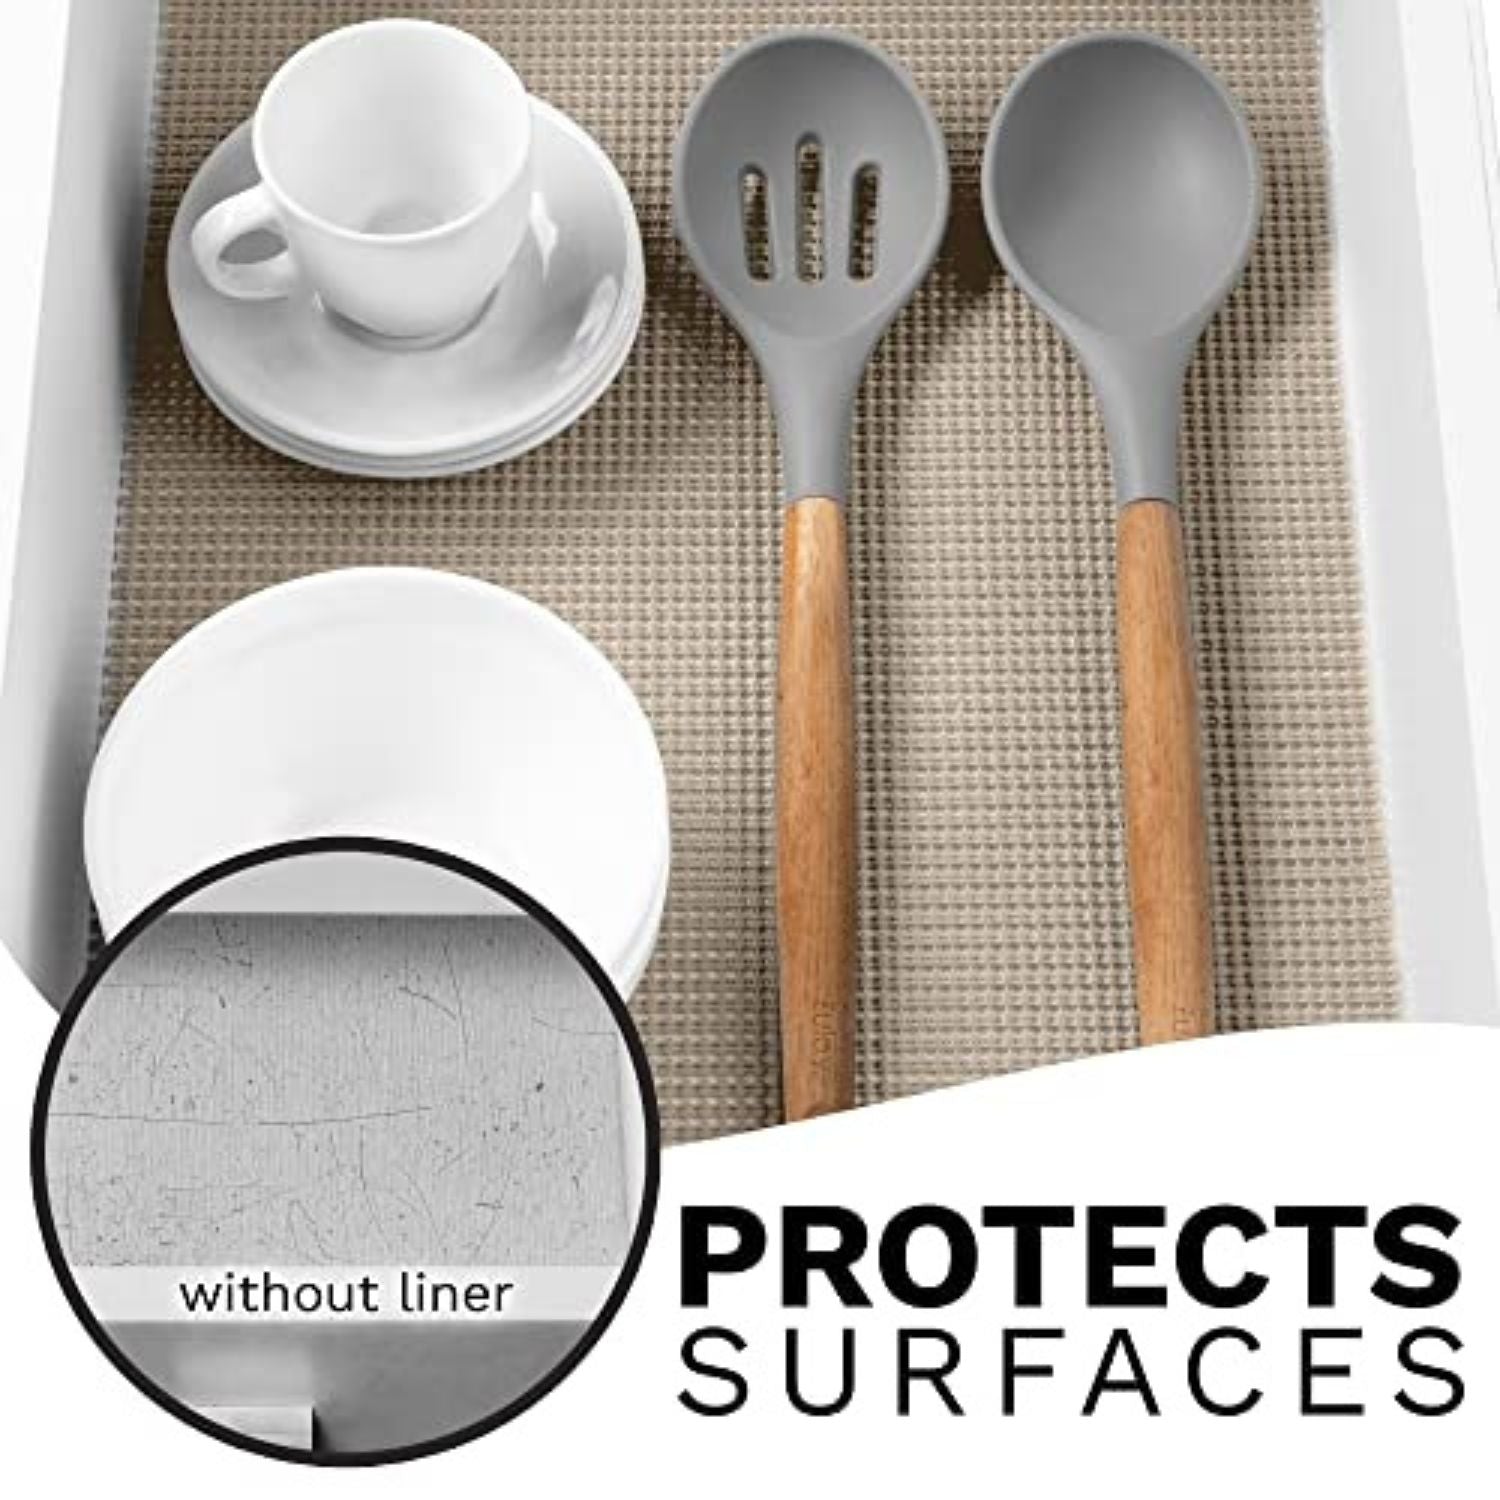 Kitchen shelf liner protects surfaces